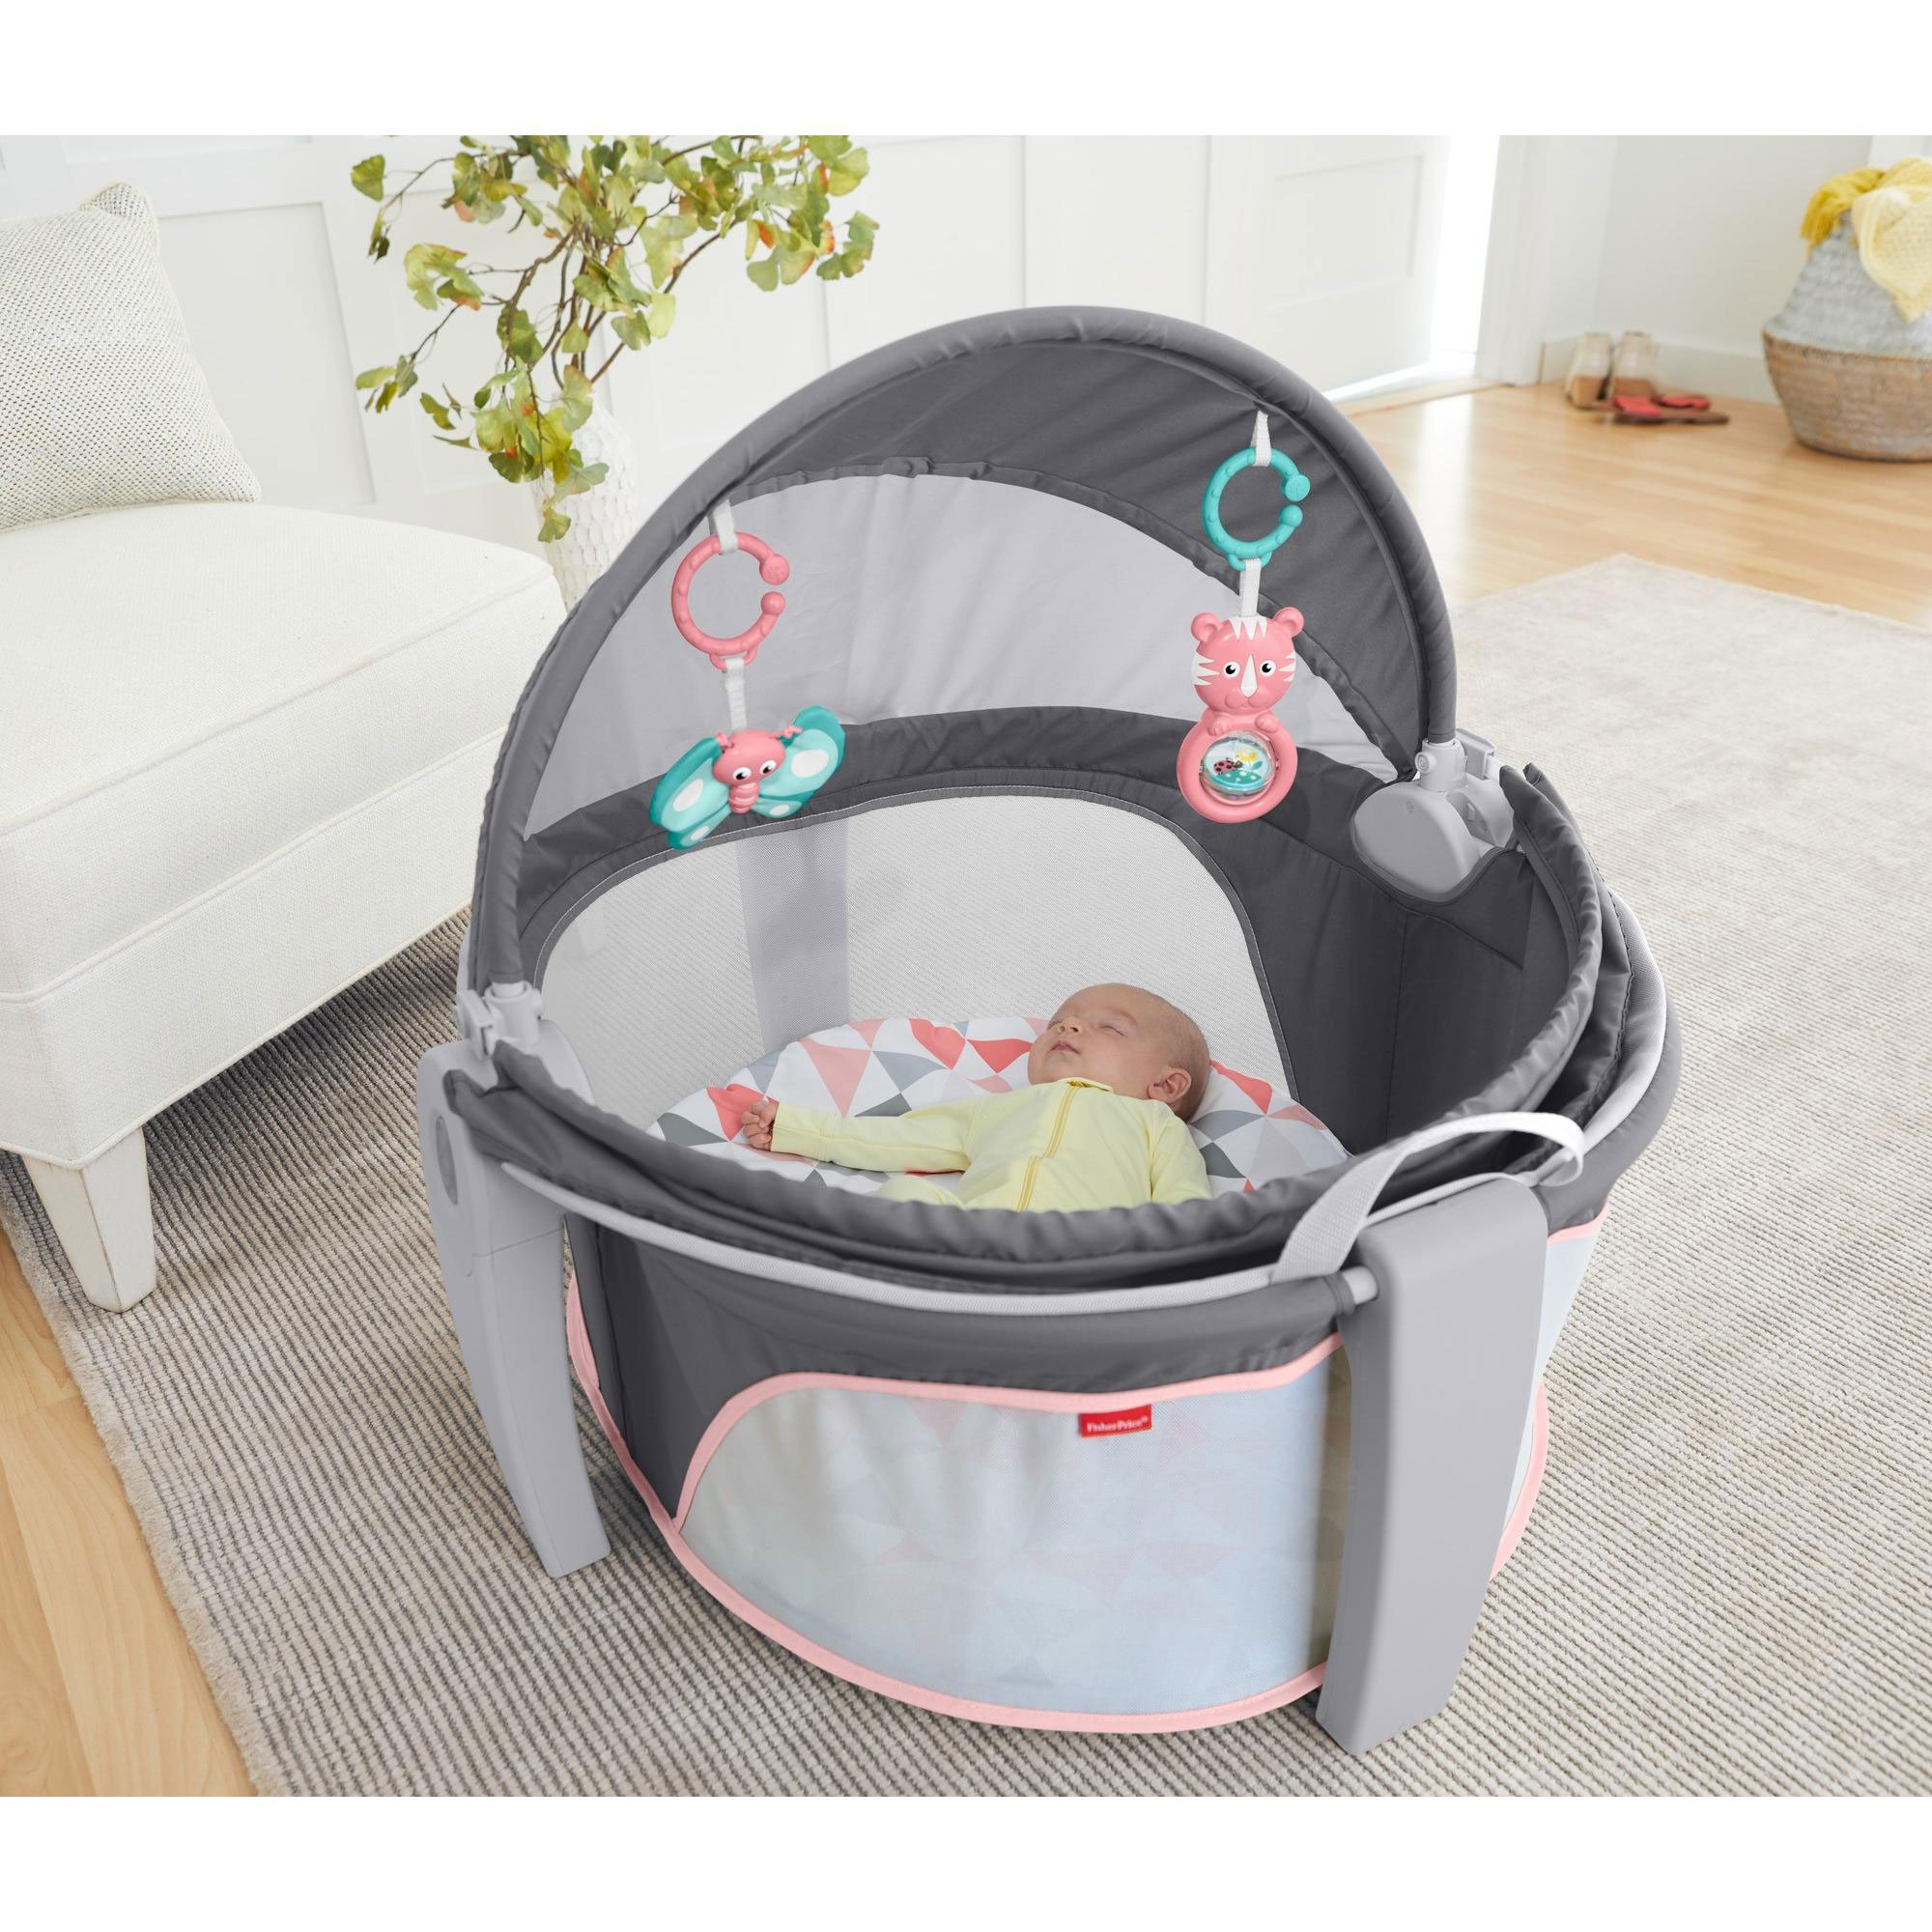 baby travel dome kmart